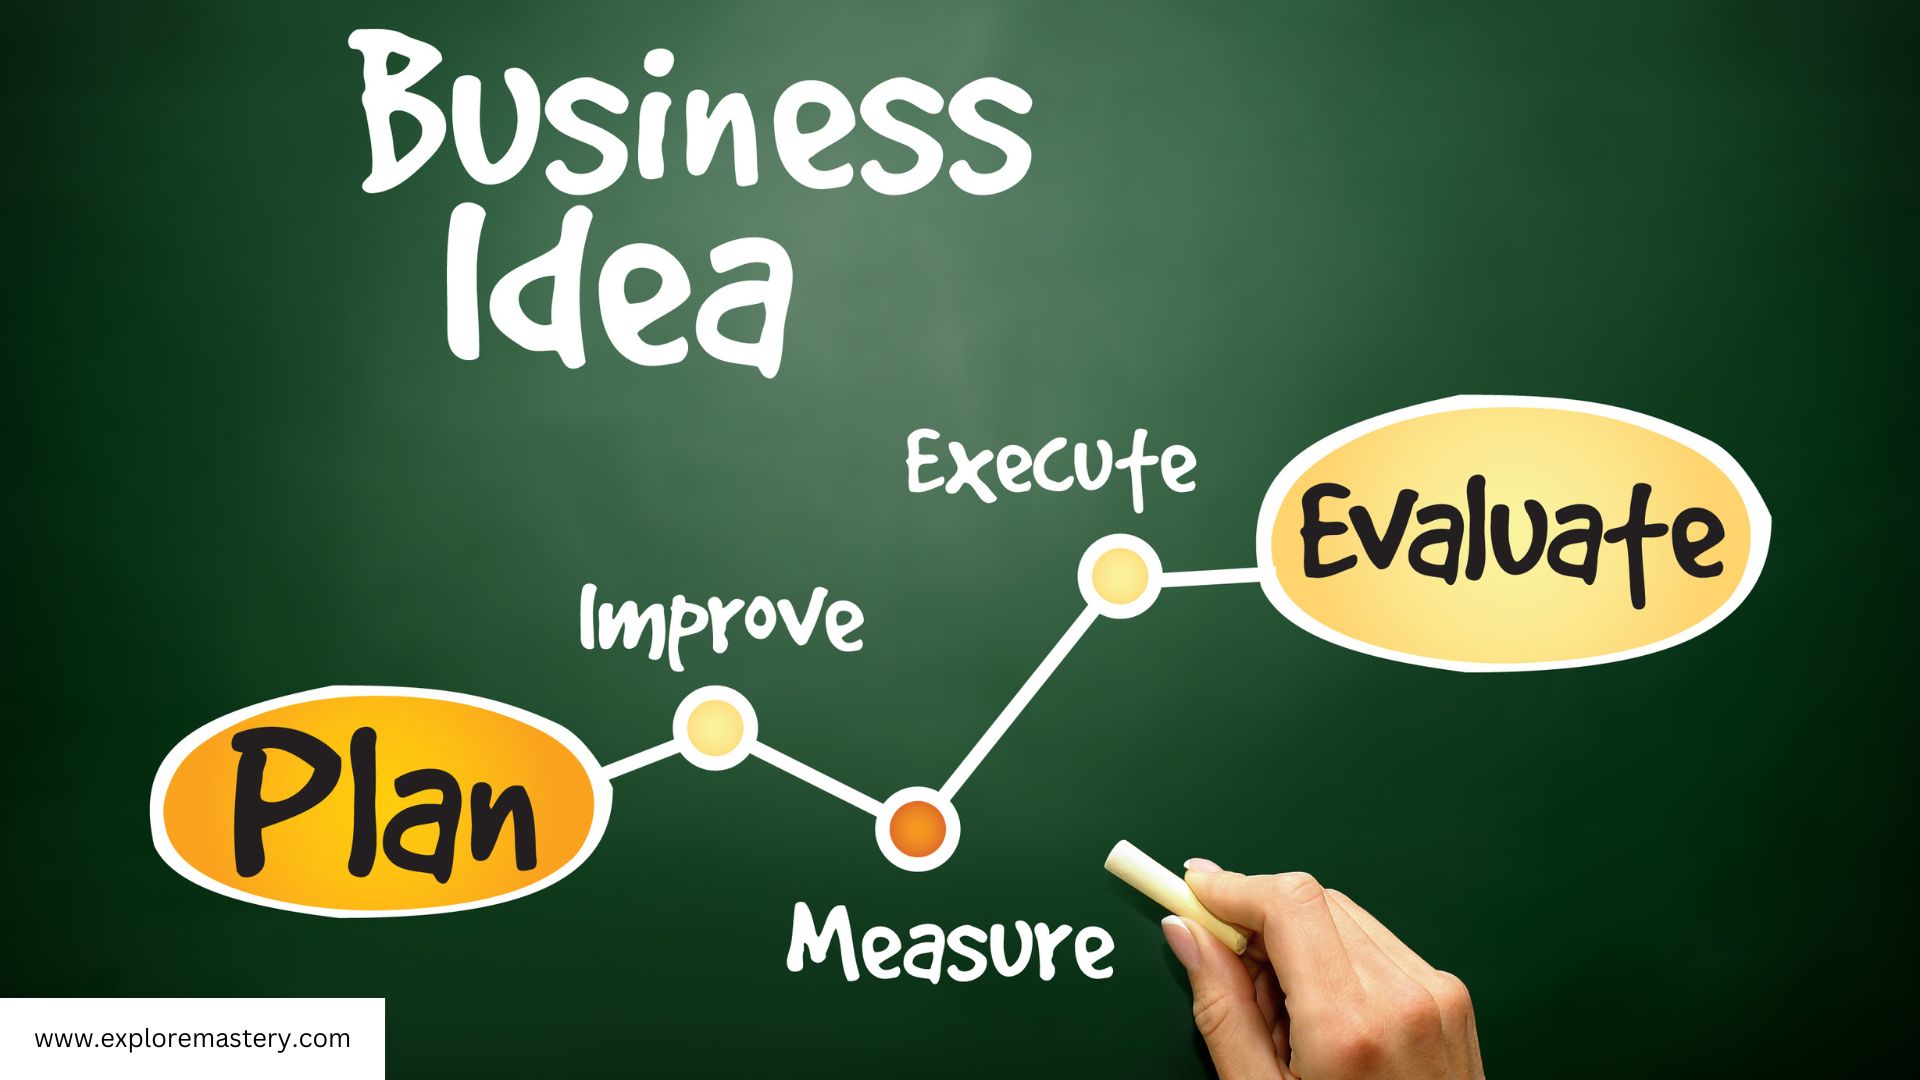 Business Ideas and Business Strategy